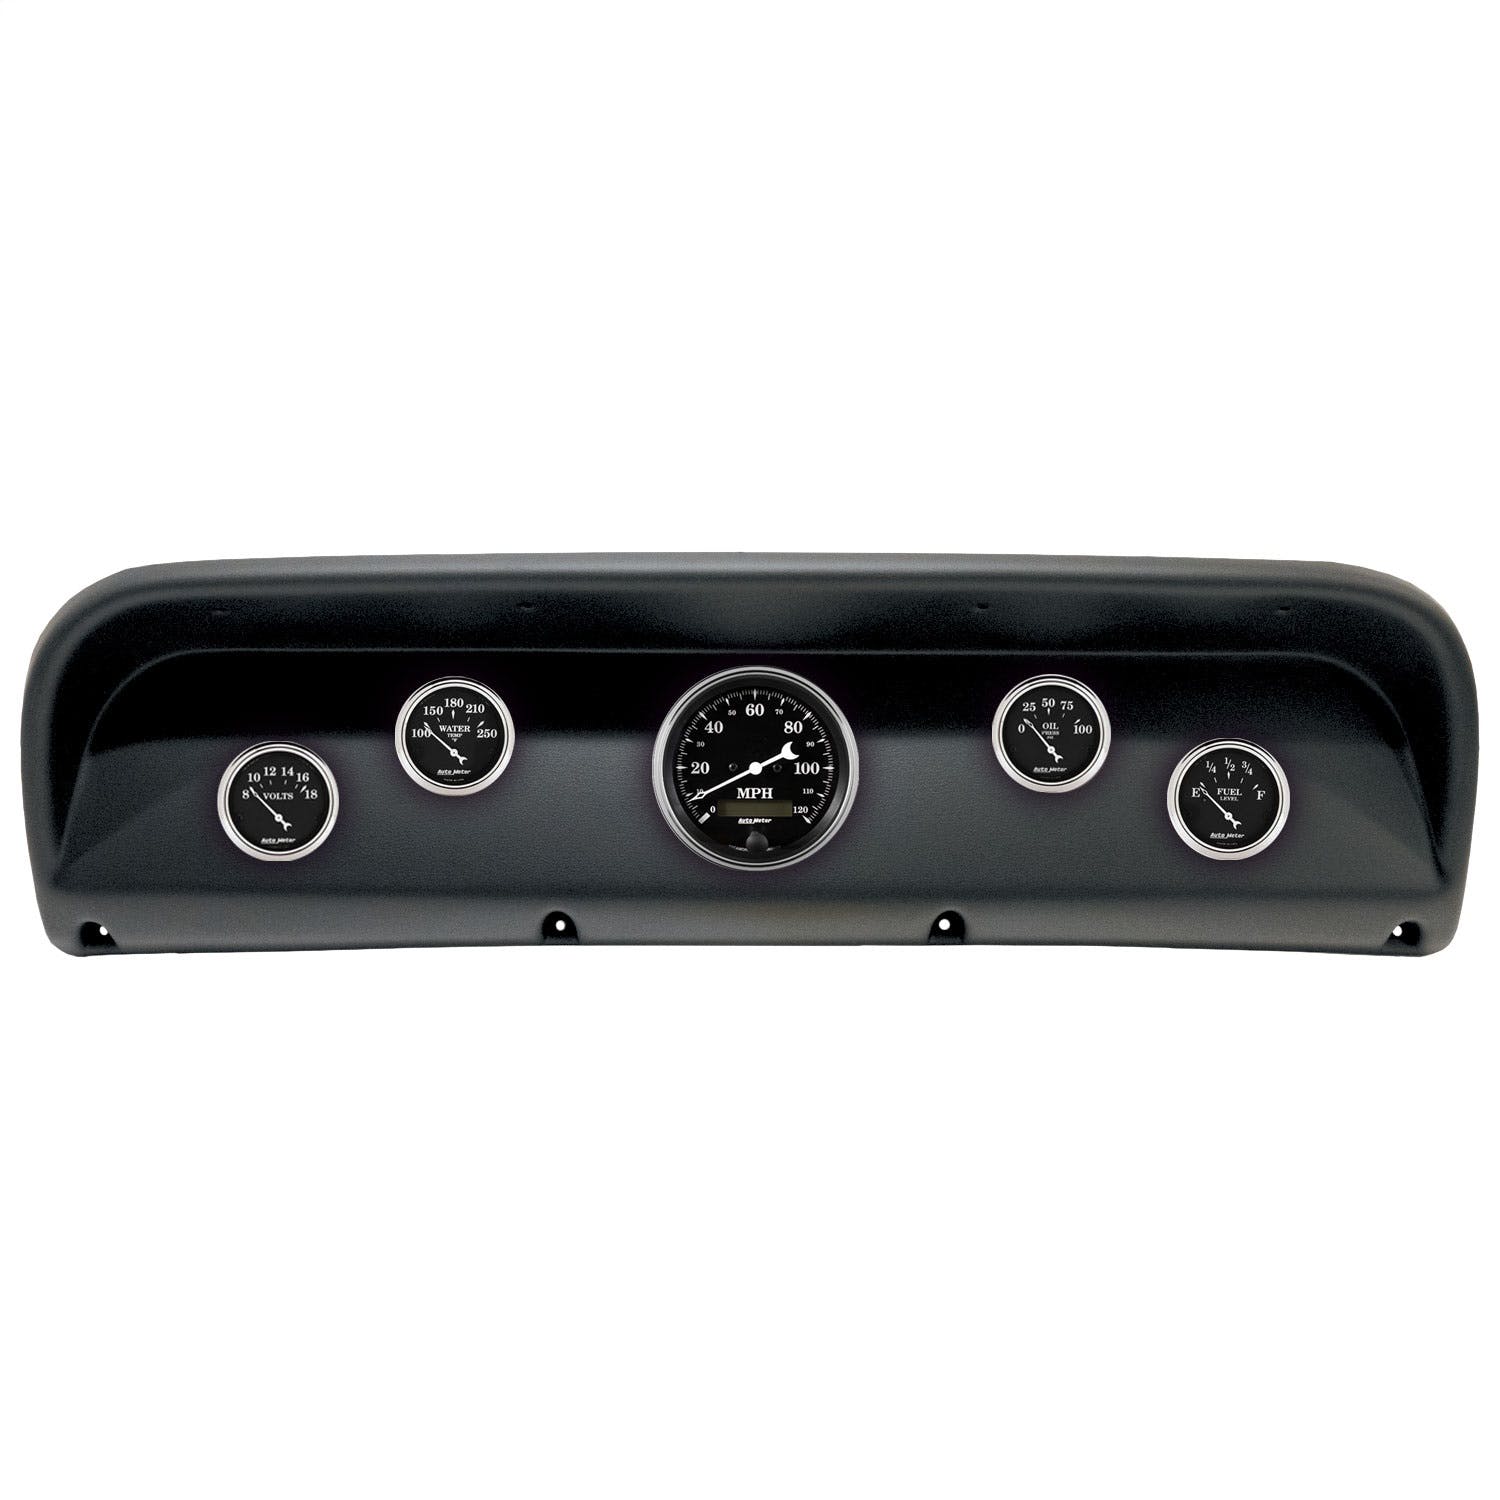 AutoMeter Products 2900-07 5 Gauge Direct-Fit Dash Kit, Ford Truck 67-72, Old Tyme Black